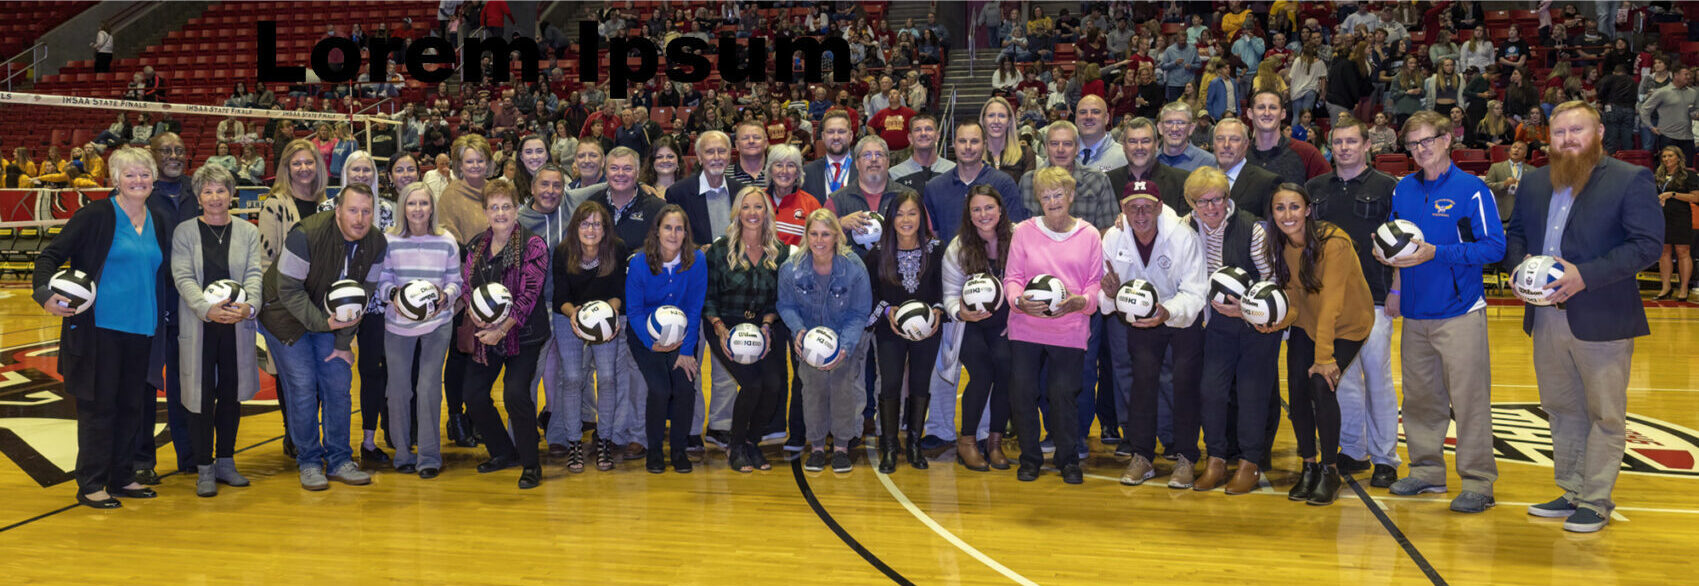 Celebrating 50 years of IHSAA Volleyball State Championships